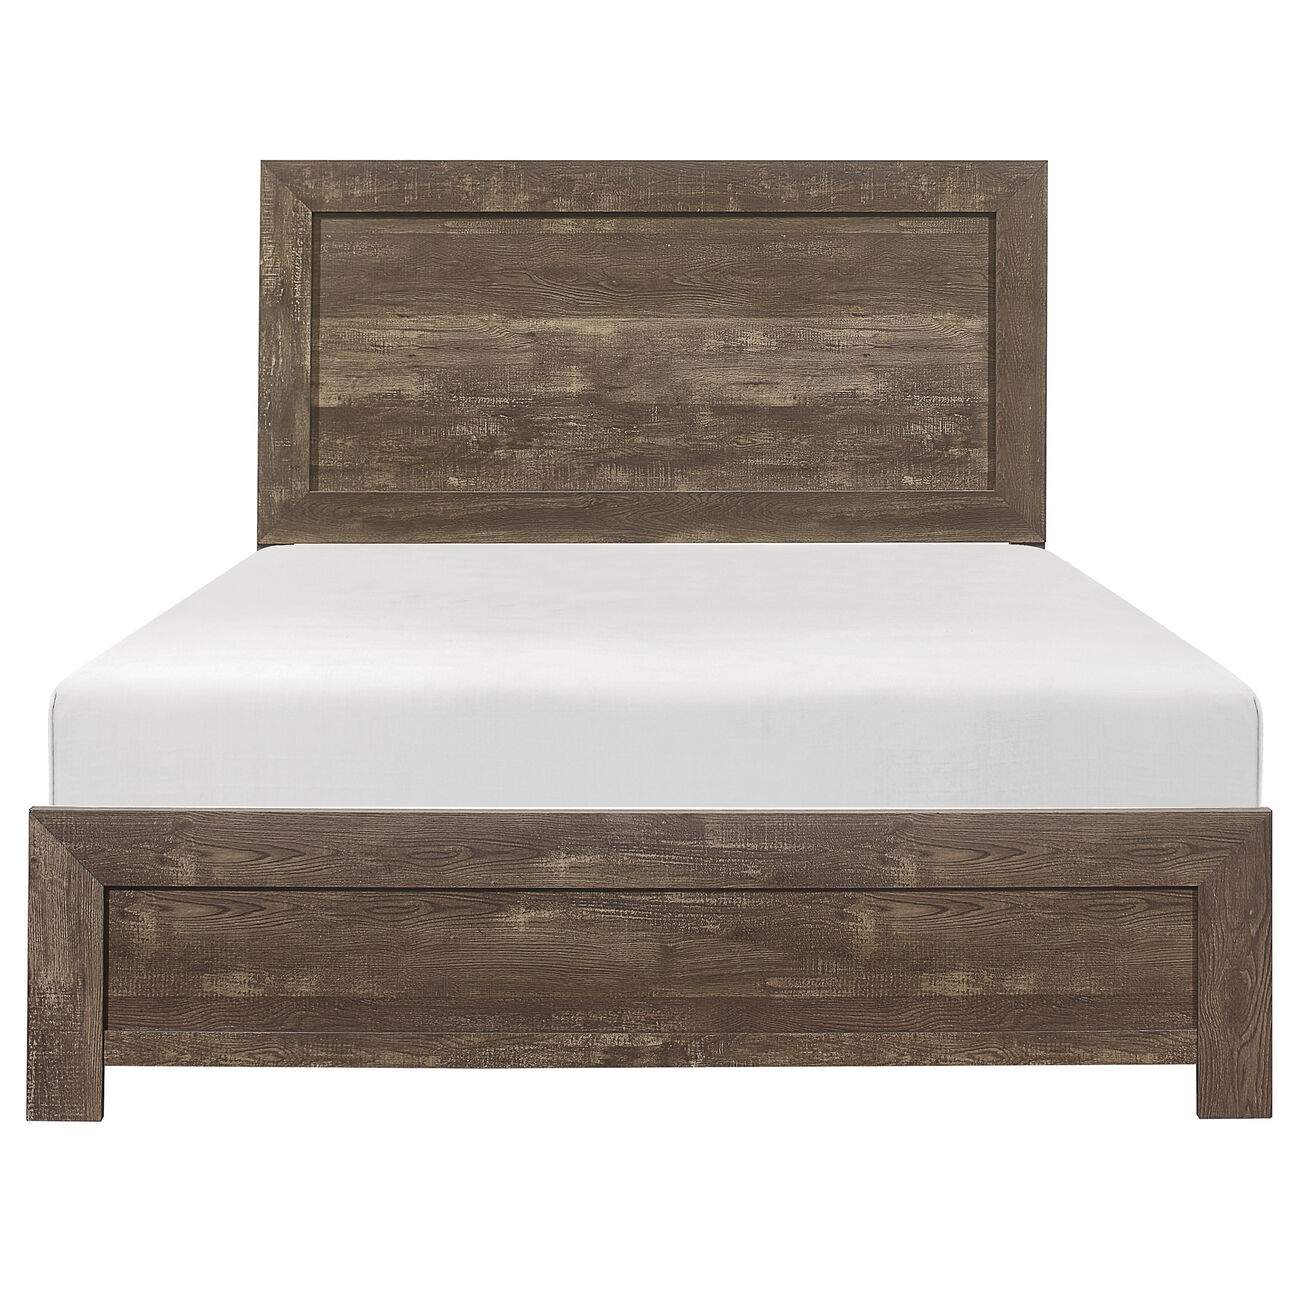 Rustic Panel Design Wooden Full Size Bed with Block Legs Support, Brown